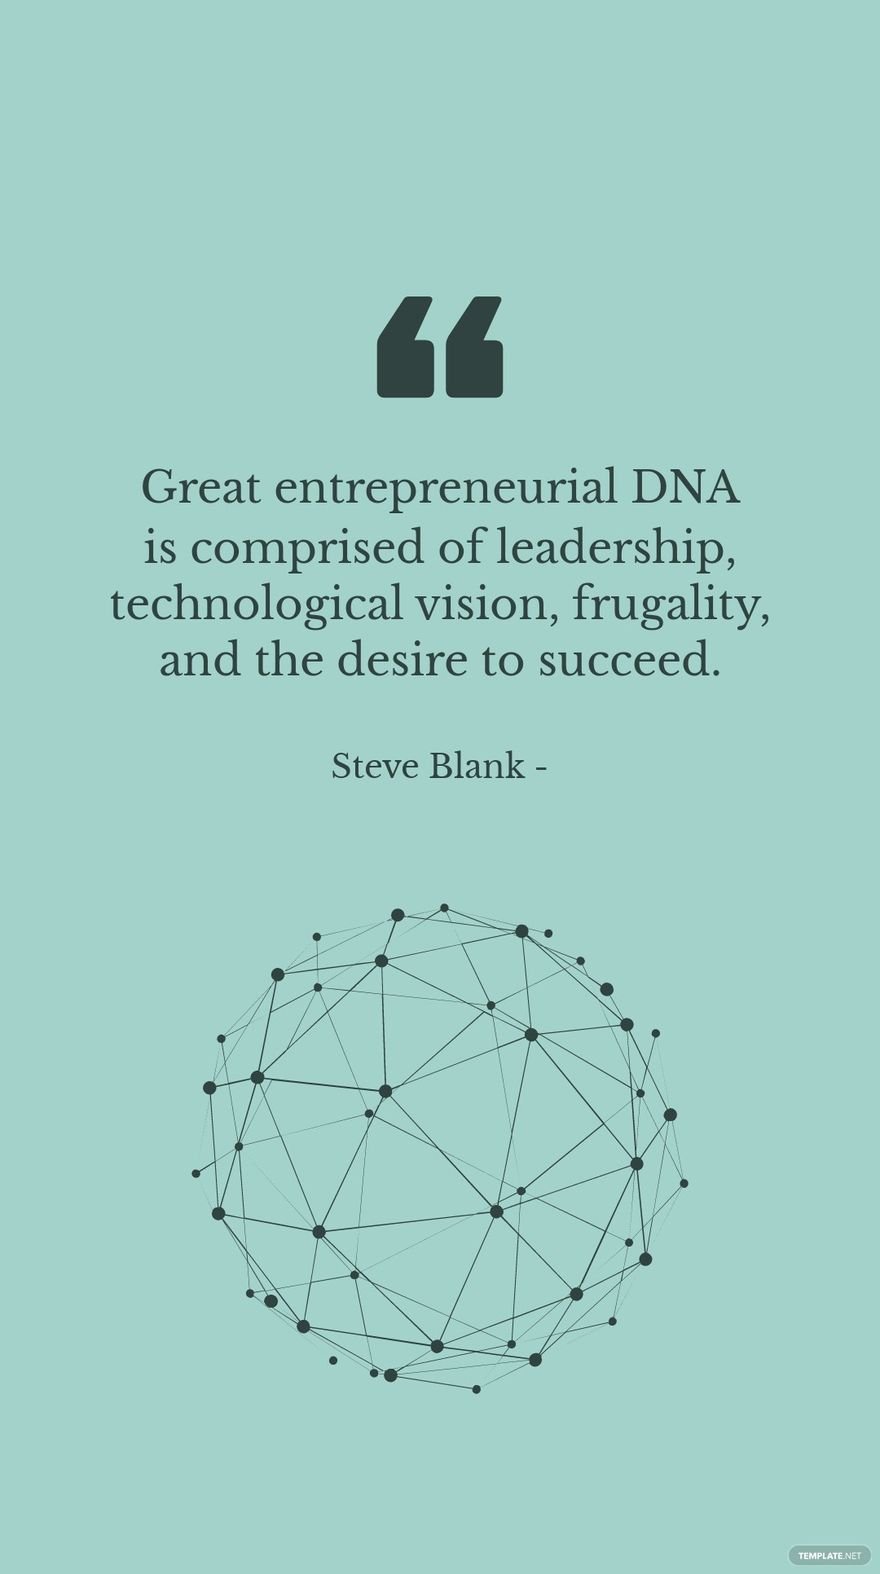 Free Steve Blank - Great entrepreneurial DNA is comprised of leadership, technological vision, frugality, and the desire to succeed. in JPG